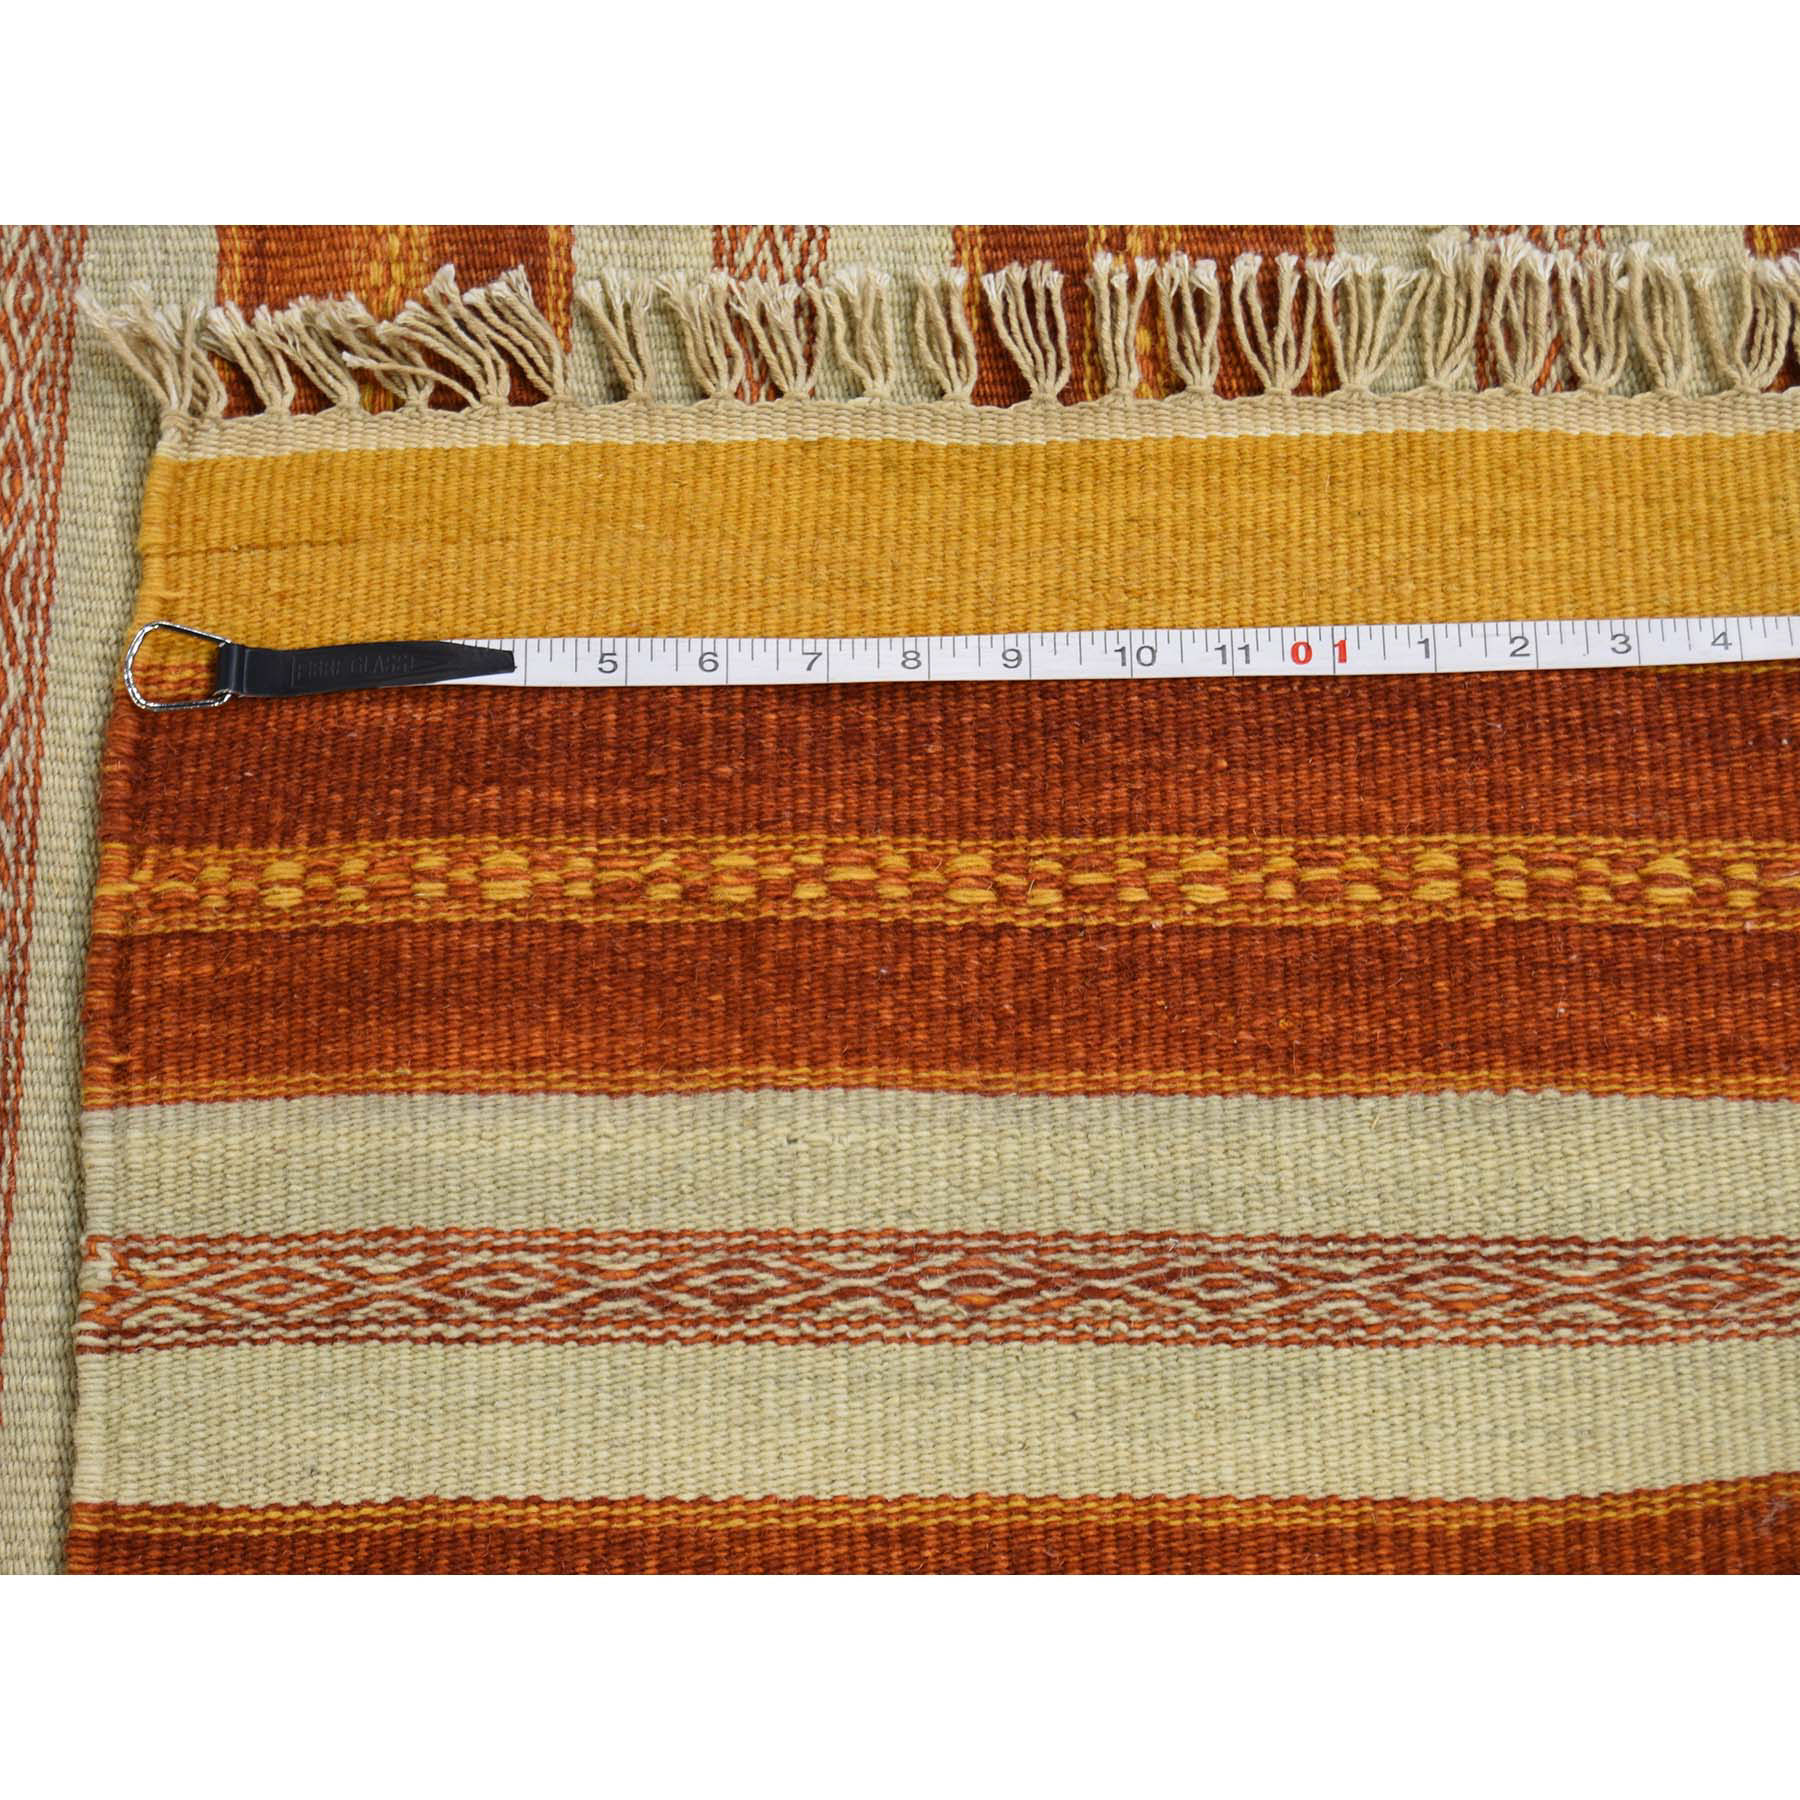 2-10--x4-9-- Flat Weave Hand Woven Striped Durie Kilim Oriental Rug 